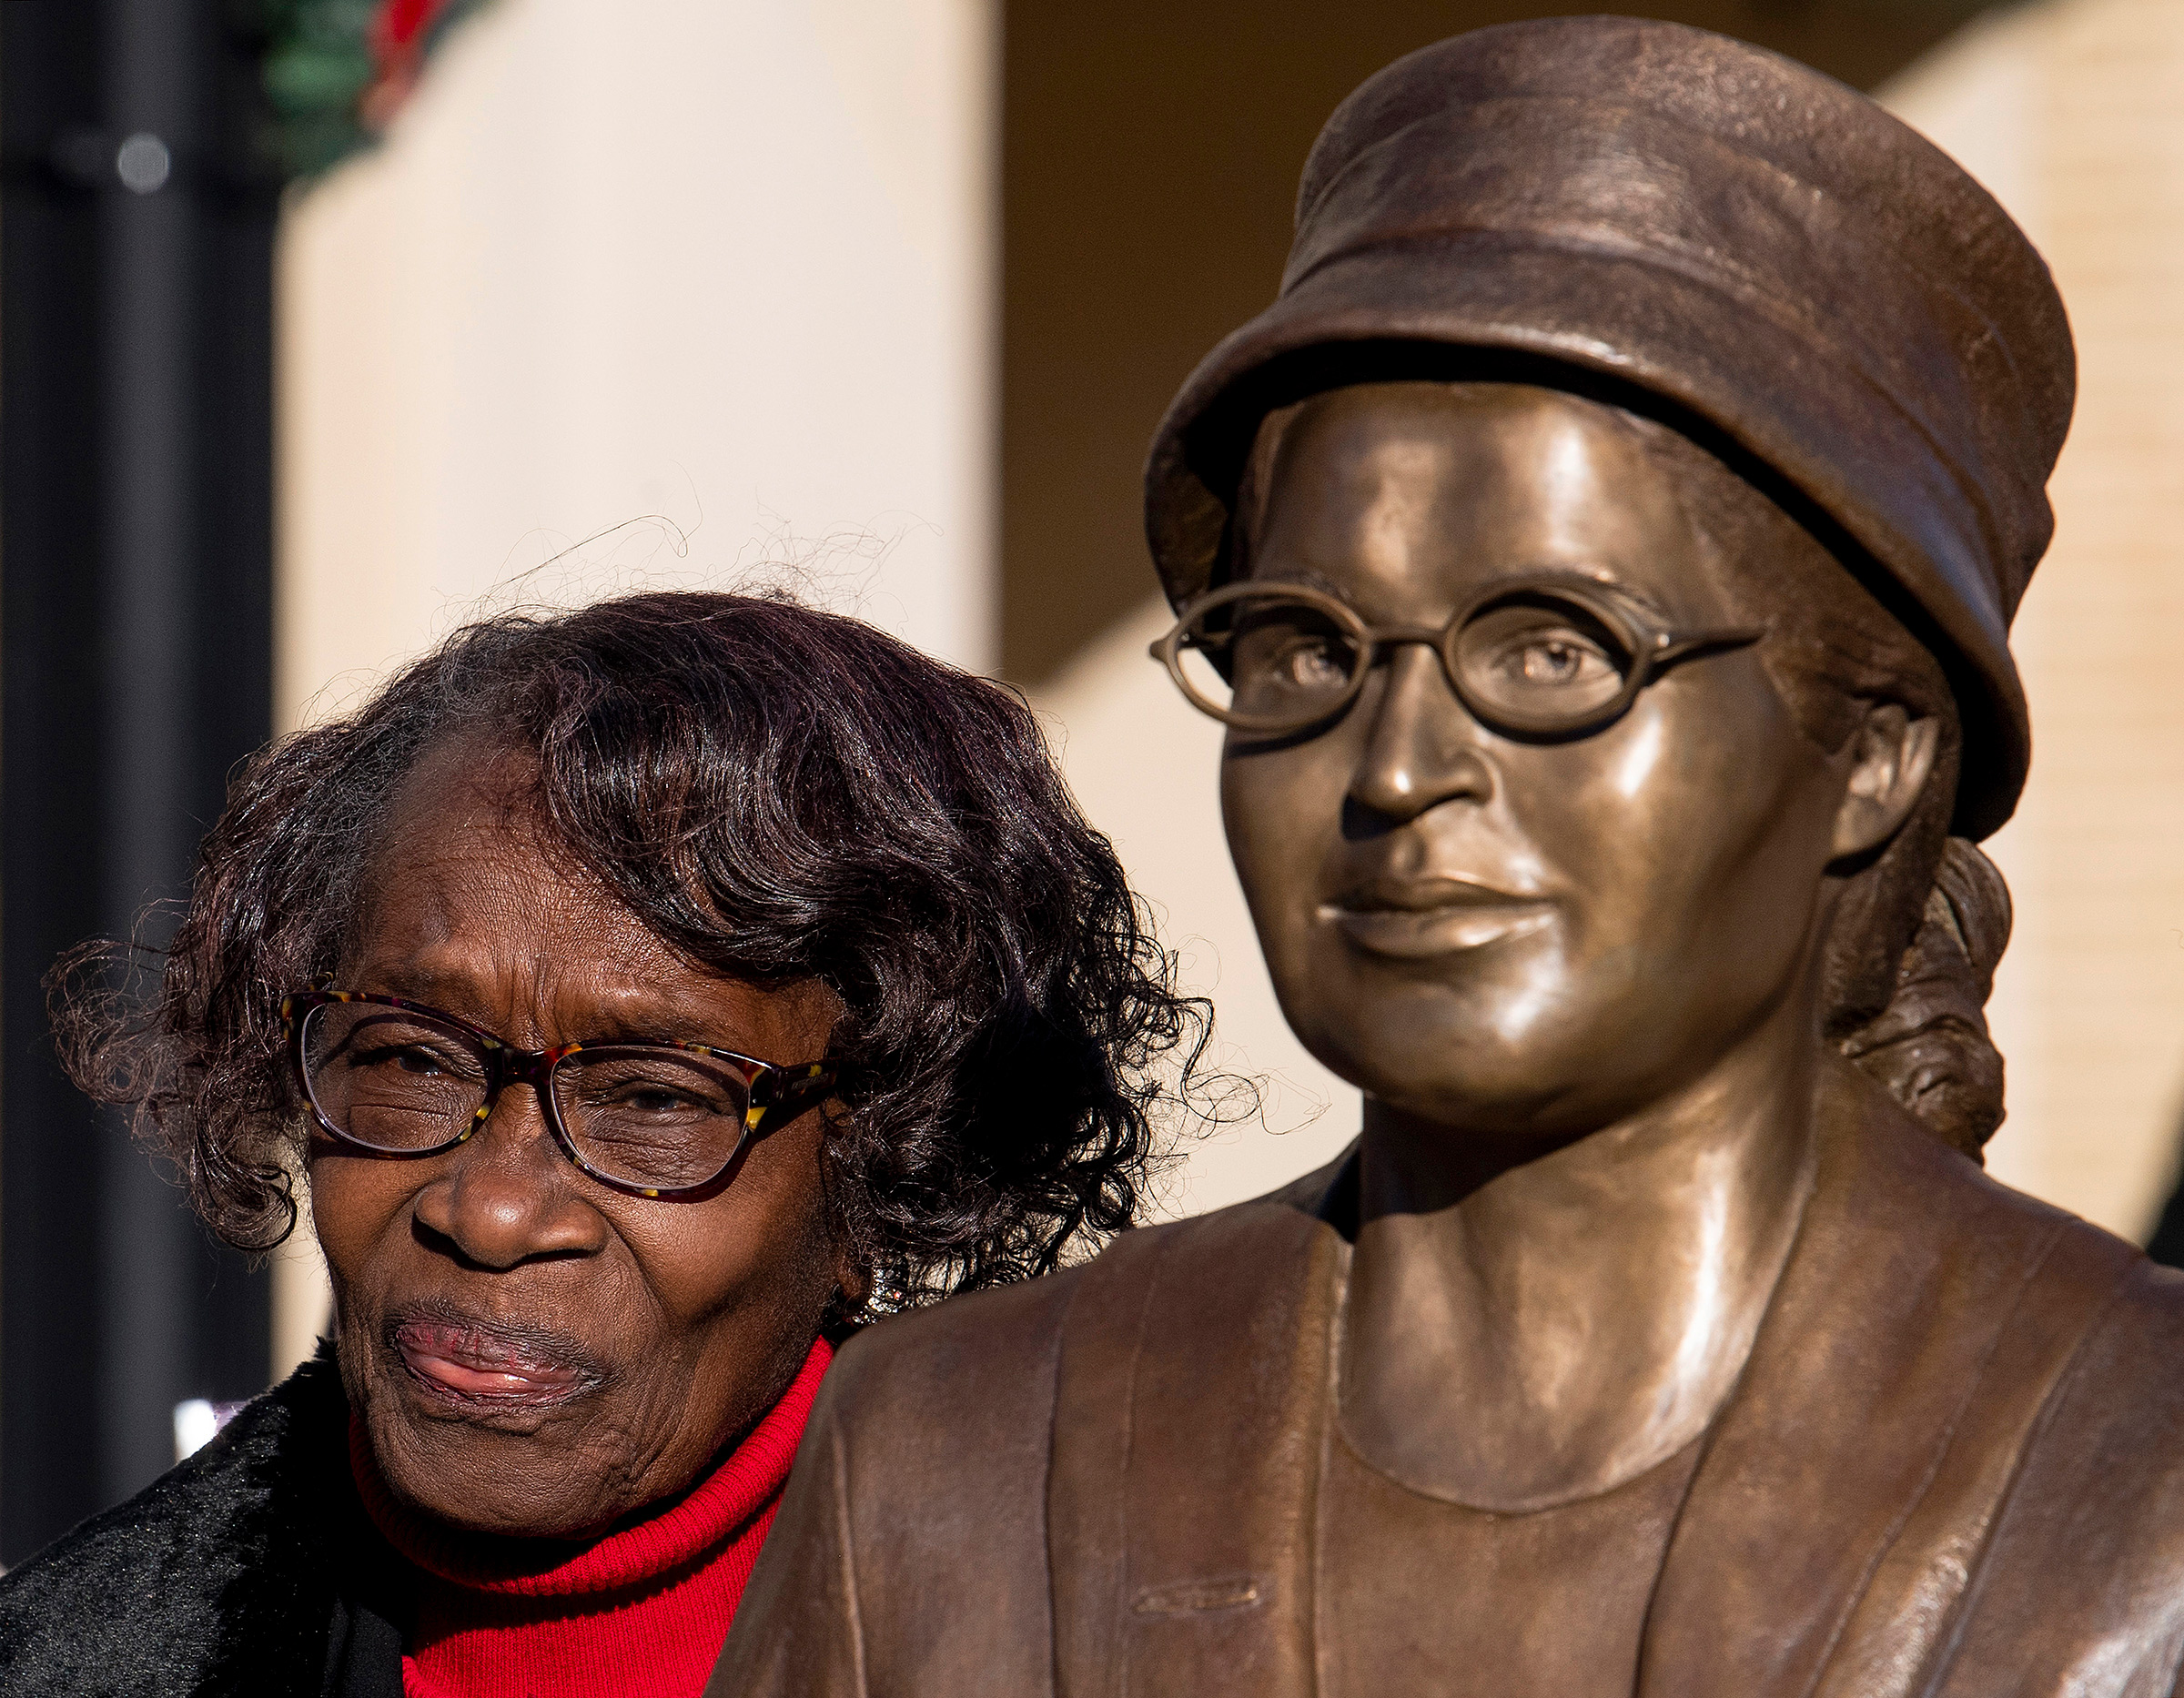 Mary Louise Smith-Ware, a plaintiff in the Browder vs. Gayle case that led to the desegregation of buses in Montgomery, stands beside the Rosa Parks statue after its unveiling event in downtown Montgomery, Ala., on Dec. 1, 2019, the anniversary of Parks being arrested for not giving up her seat on a city bus. (Mickey Welsh—Montgomery Advertiser/AP)